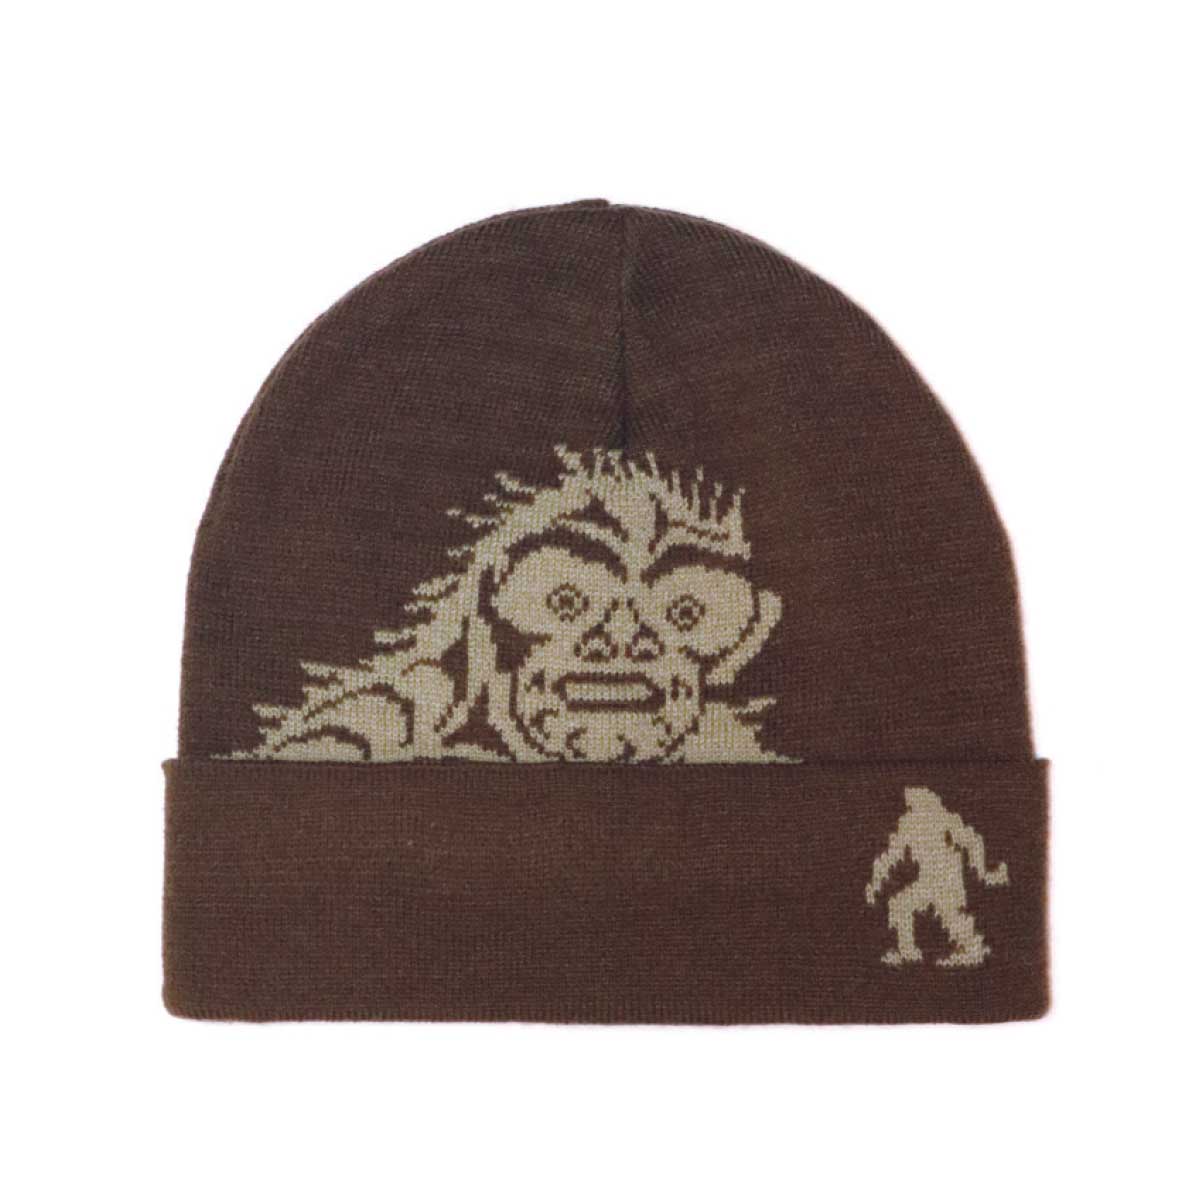 Toque Sasquatch (brown) - Toque Sasquatch (brown) -  - House of Himwitsa Native Art Gallery and Gifts